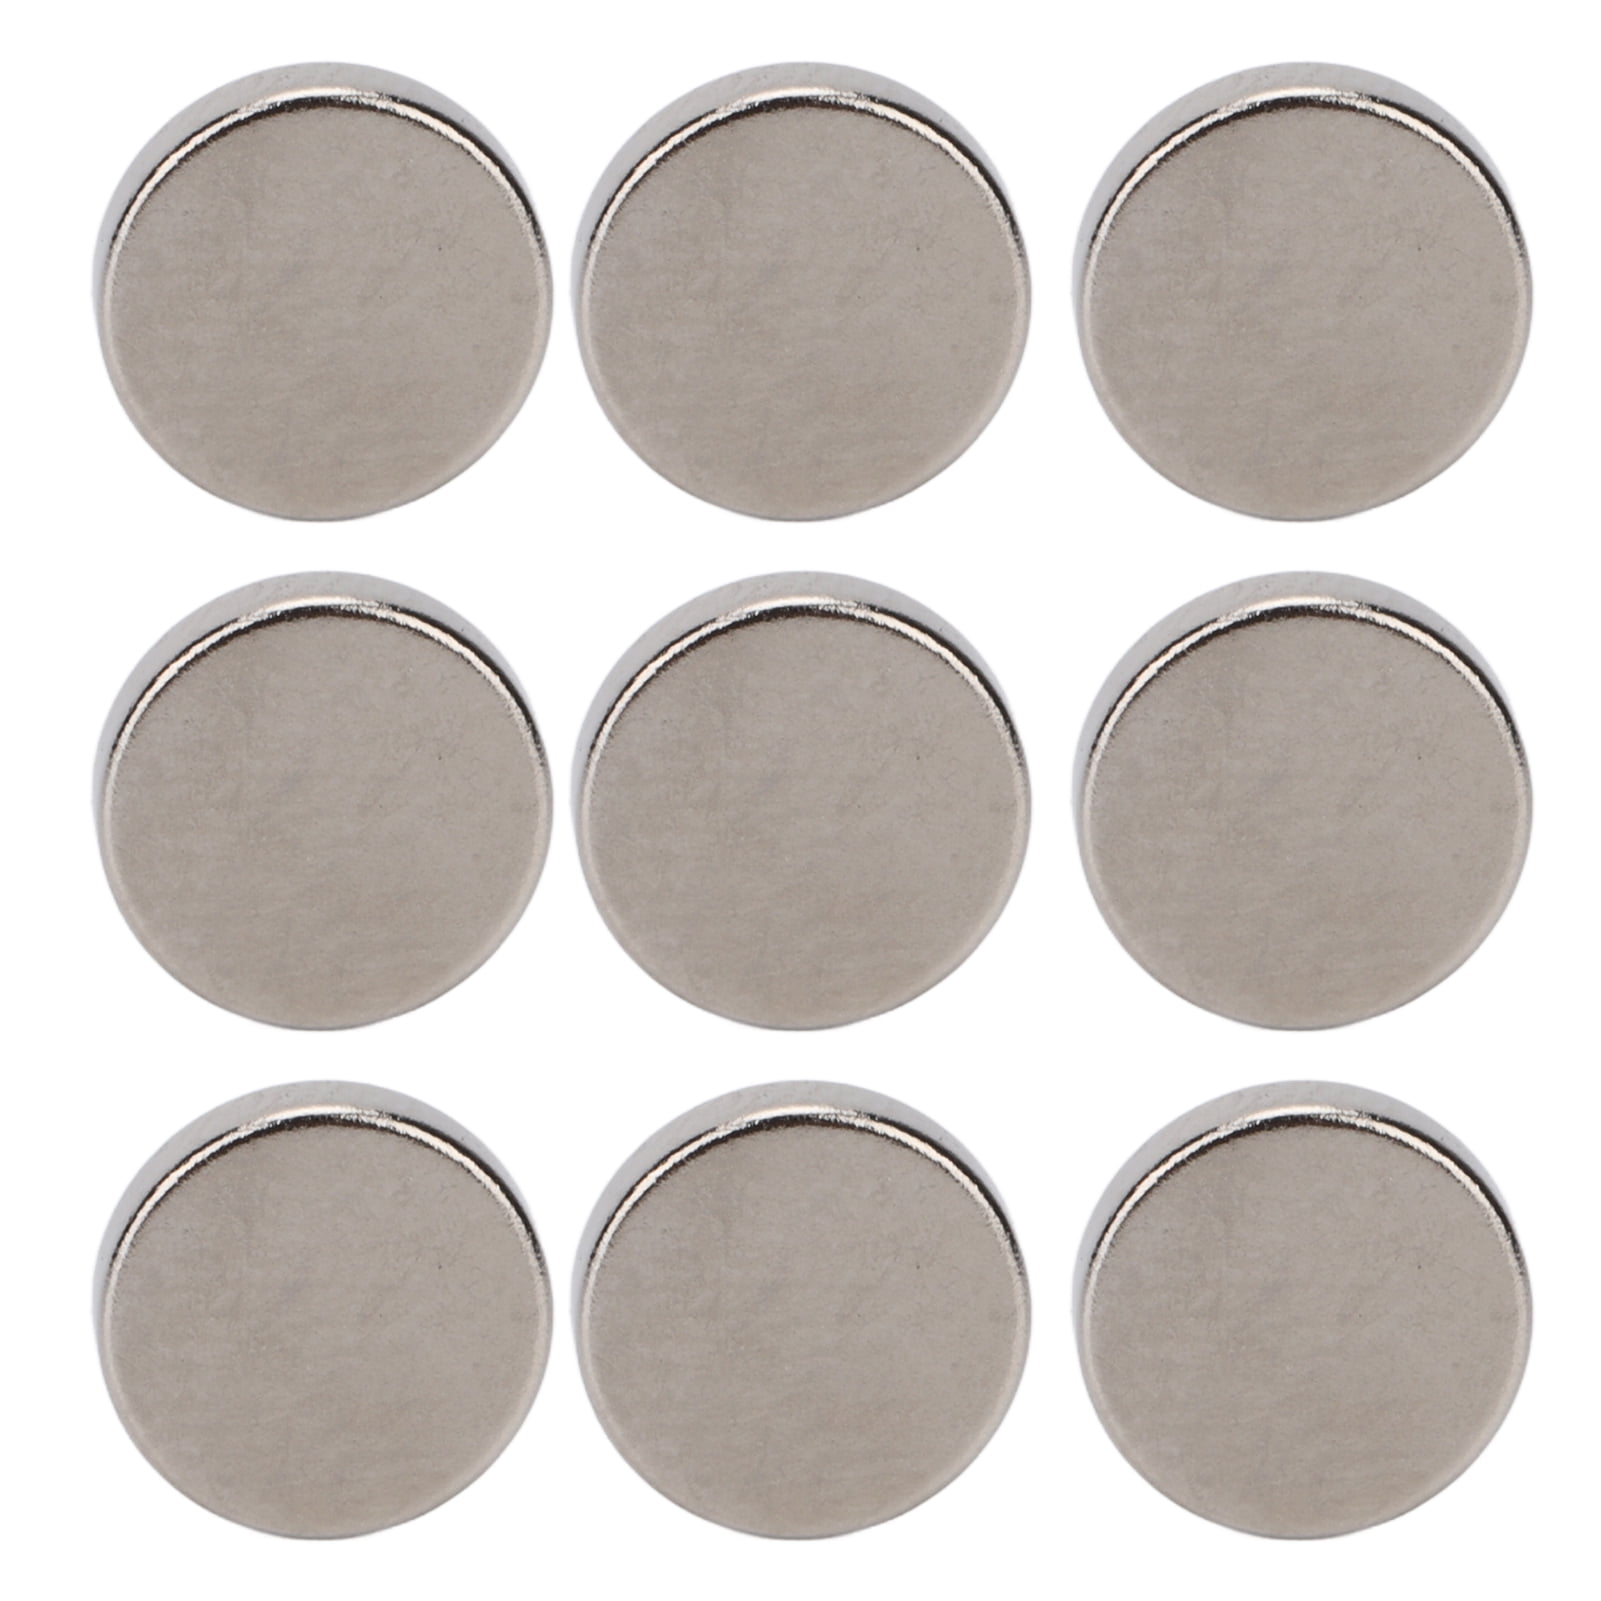 Magnets, Durable Round 100PCS Multifunctional Super Strong